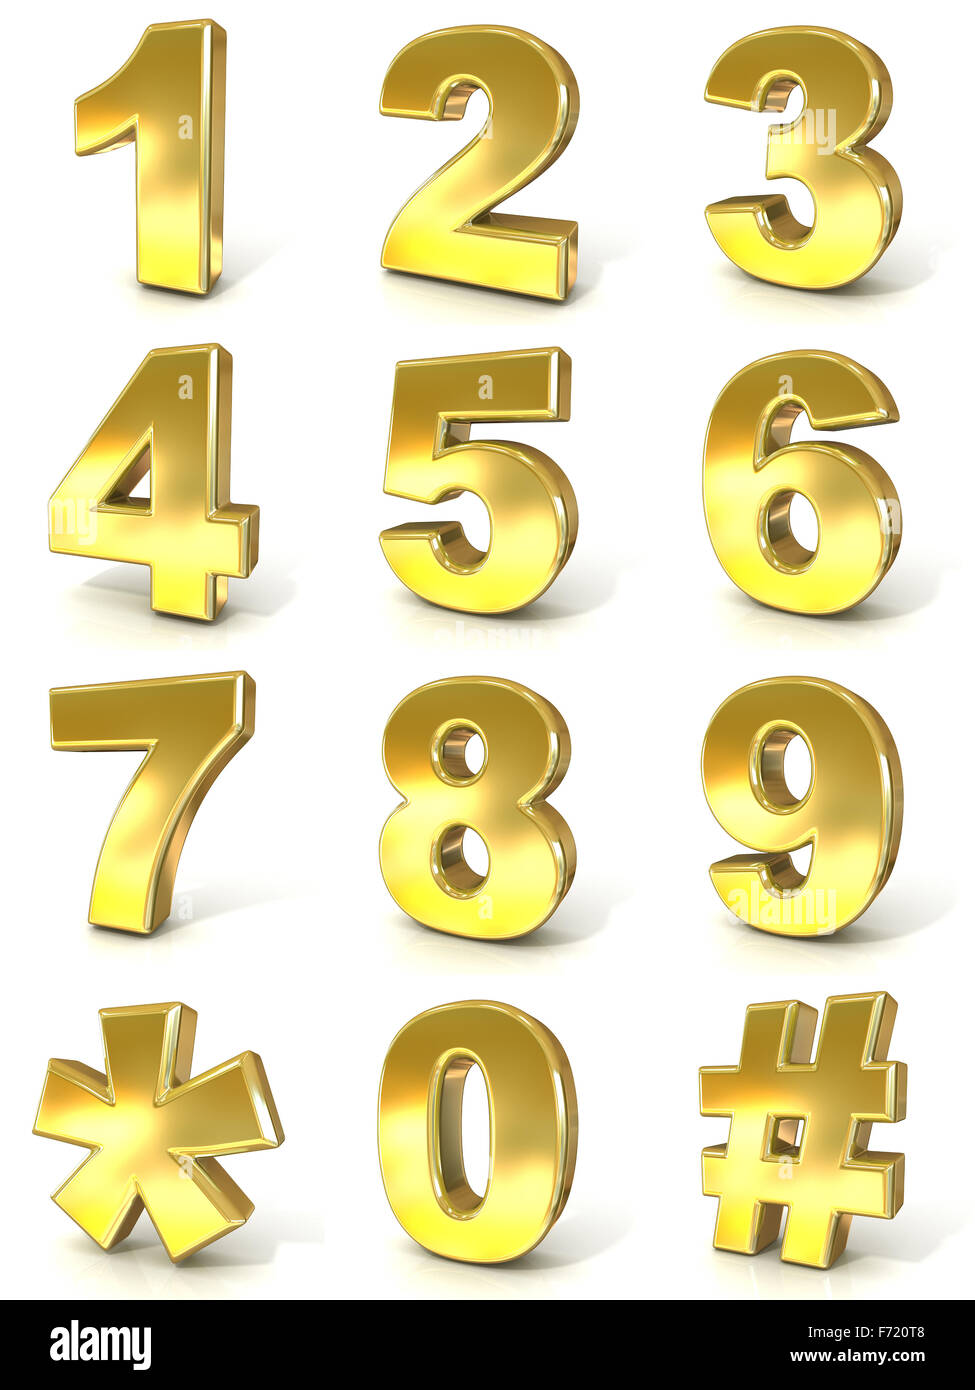 Numerical digits collection, 0 - 9, plus hash tag and asterisk. 3D golden signs isolated on white background. Render illustratio Stock Photo